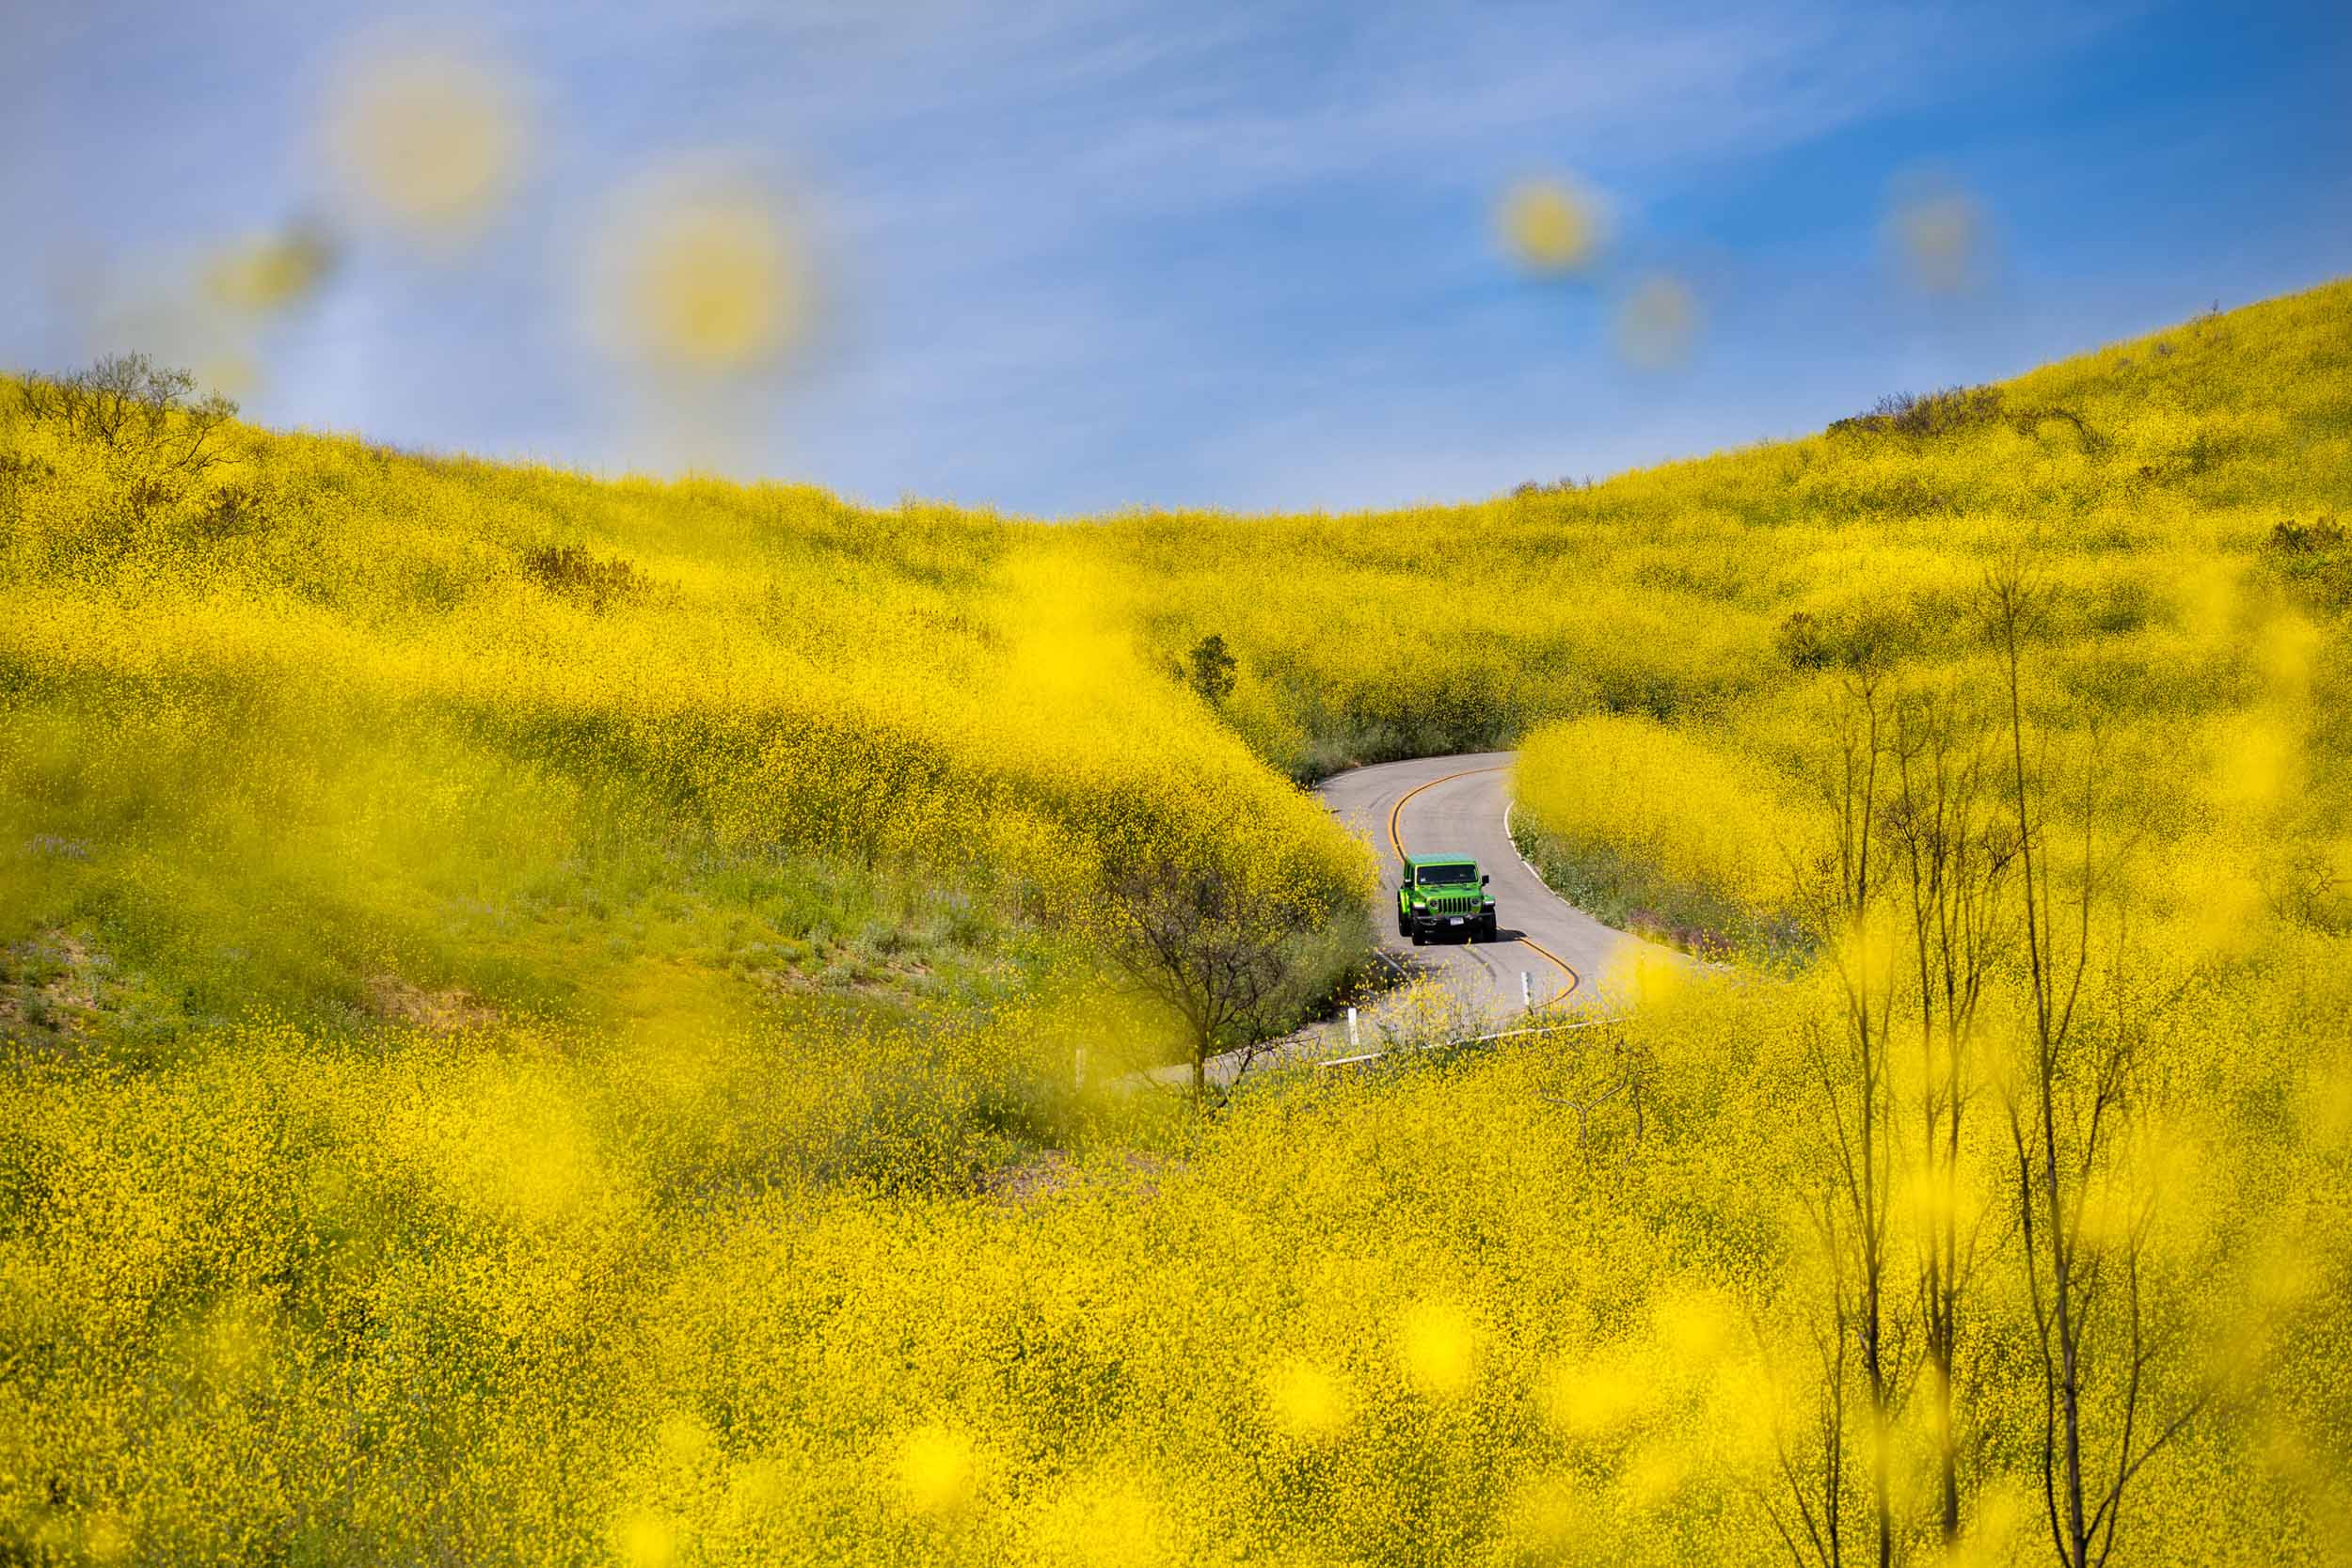 A Jeep drives through yellow wildflowers in Malibu, Calif. during a superbloom.